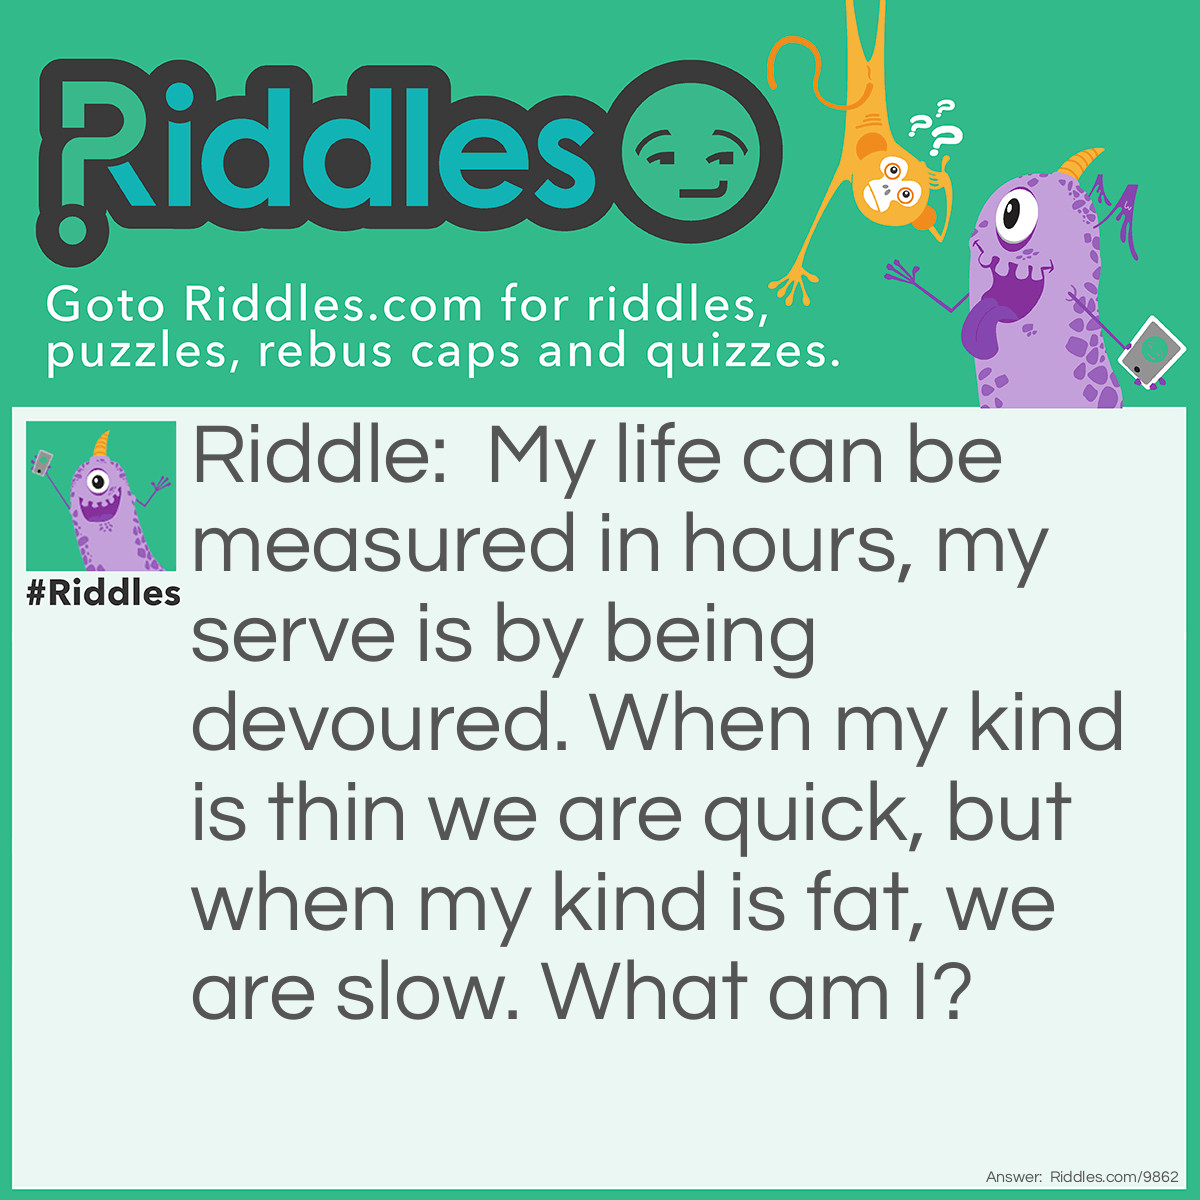 Riddle: My life can be measured in hours, my serve is by being devoured. When my kind is thin we are quick, but when my kind is fat, we are slow. What am I? Answer: I am a candle.